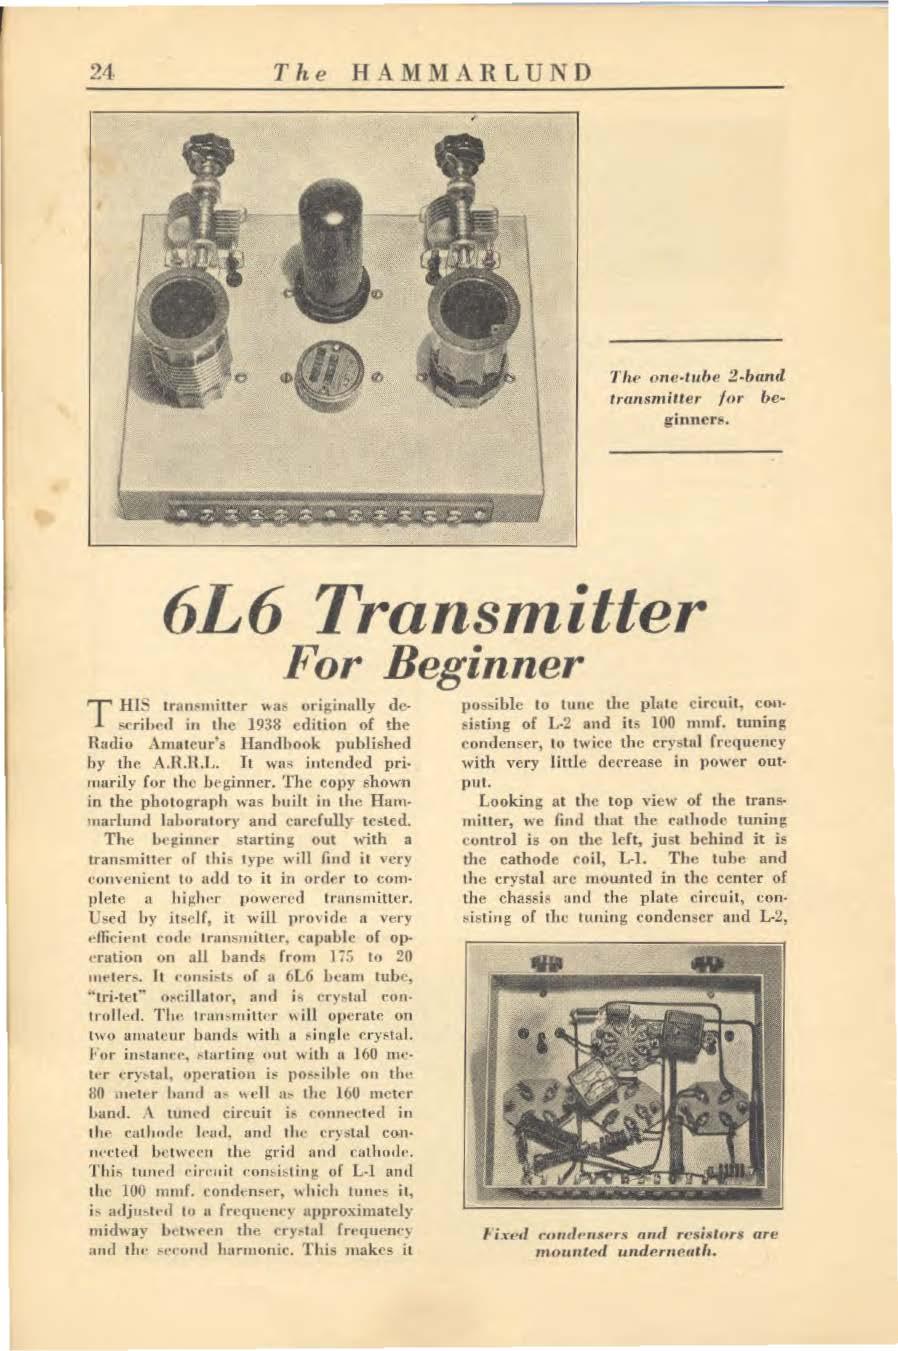 21. The HAMMARLUND The one -tube 2 -band transmitter for beginners.